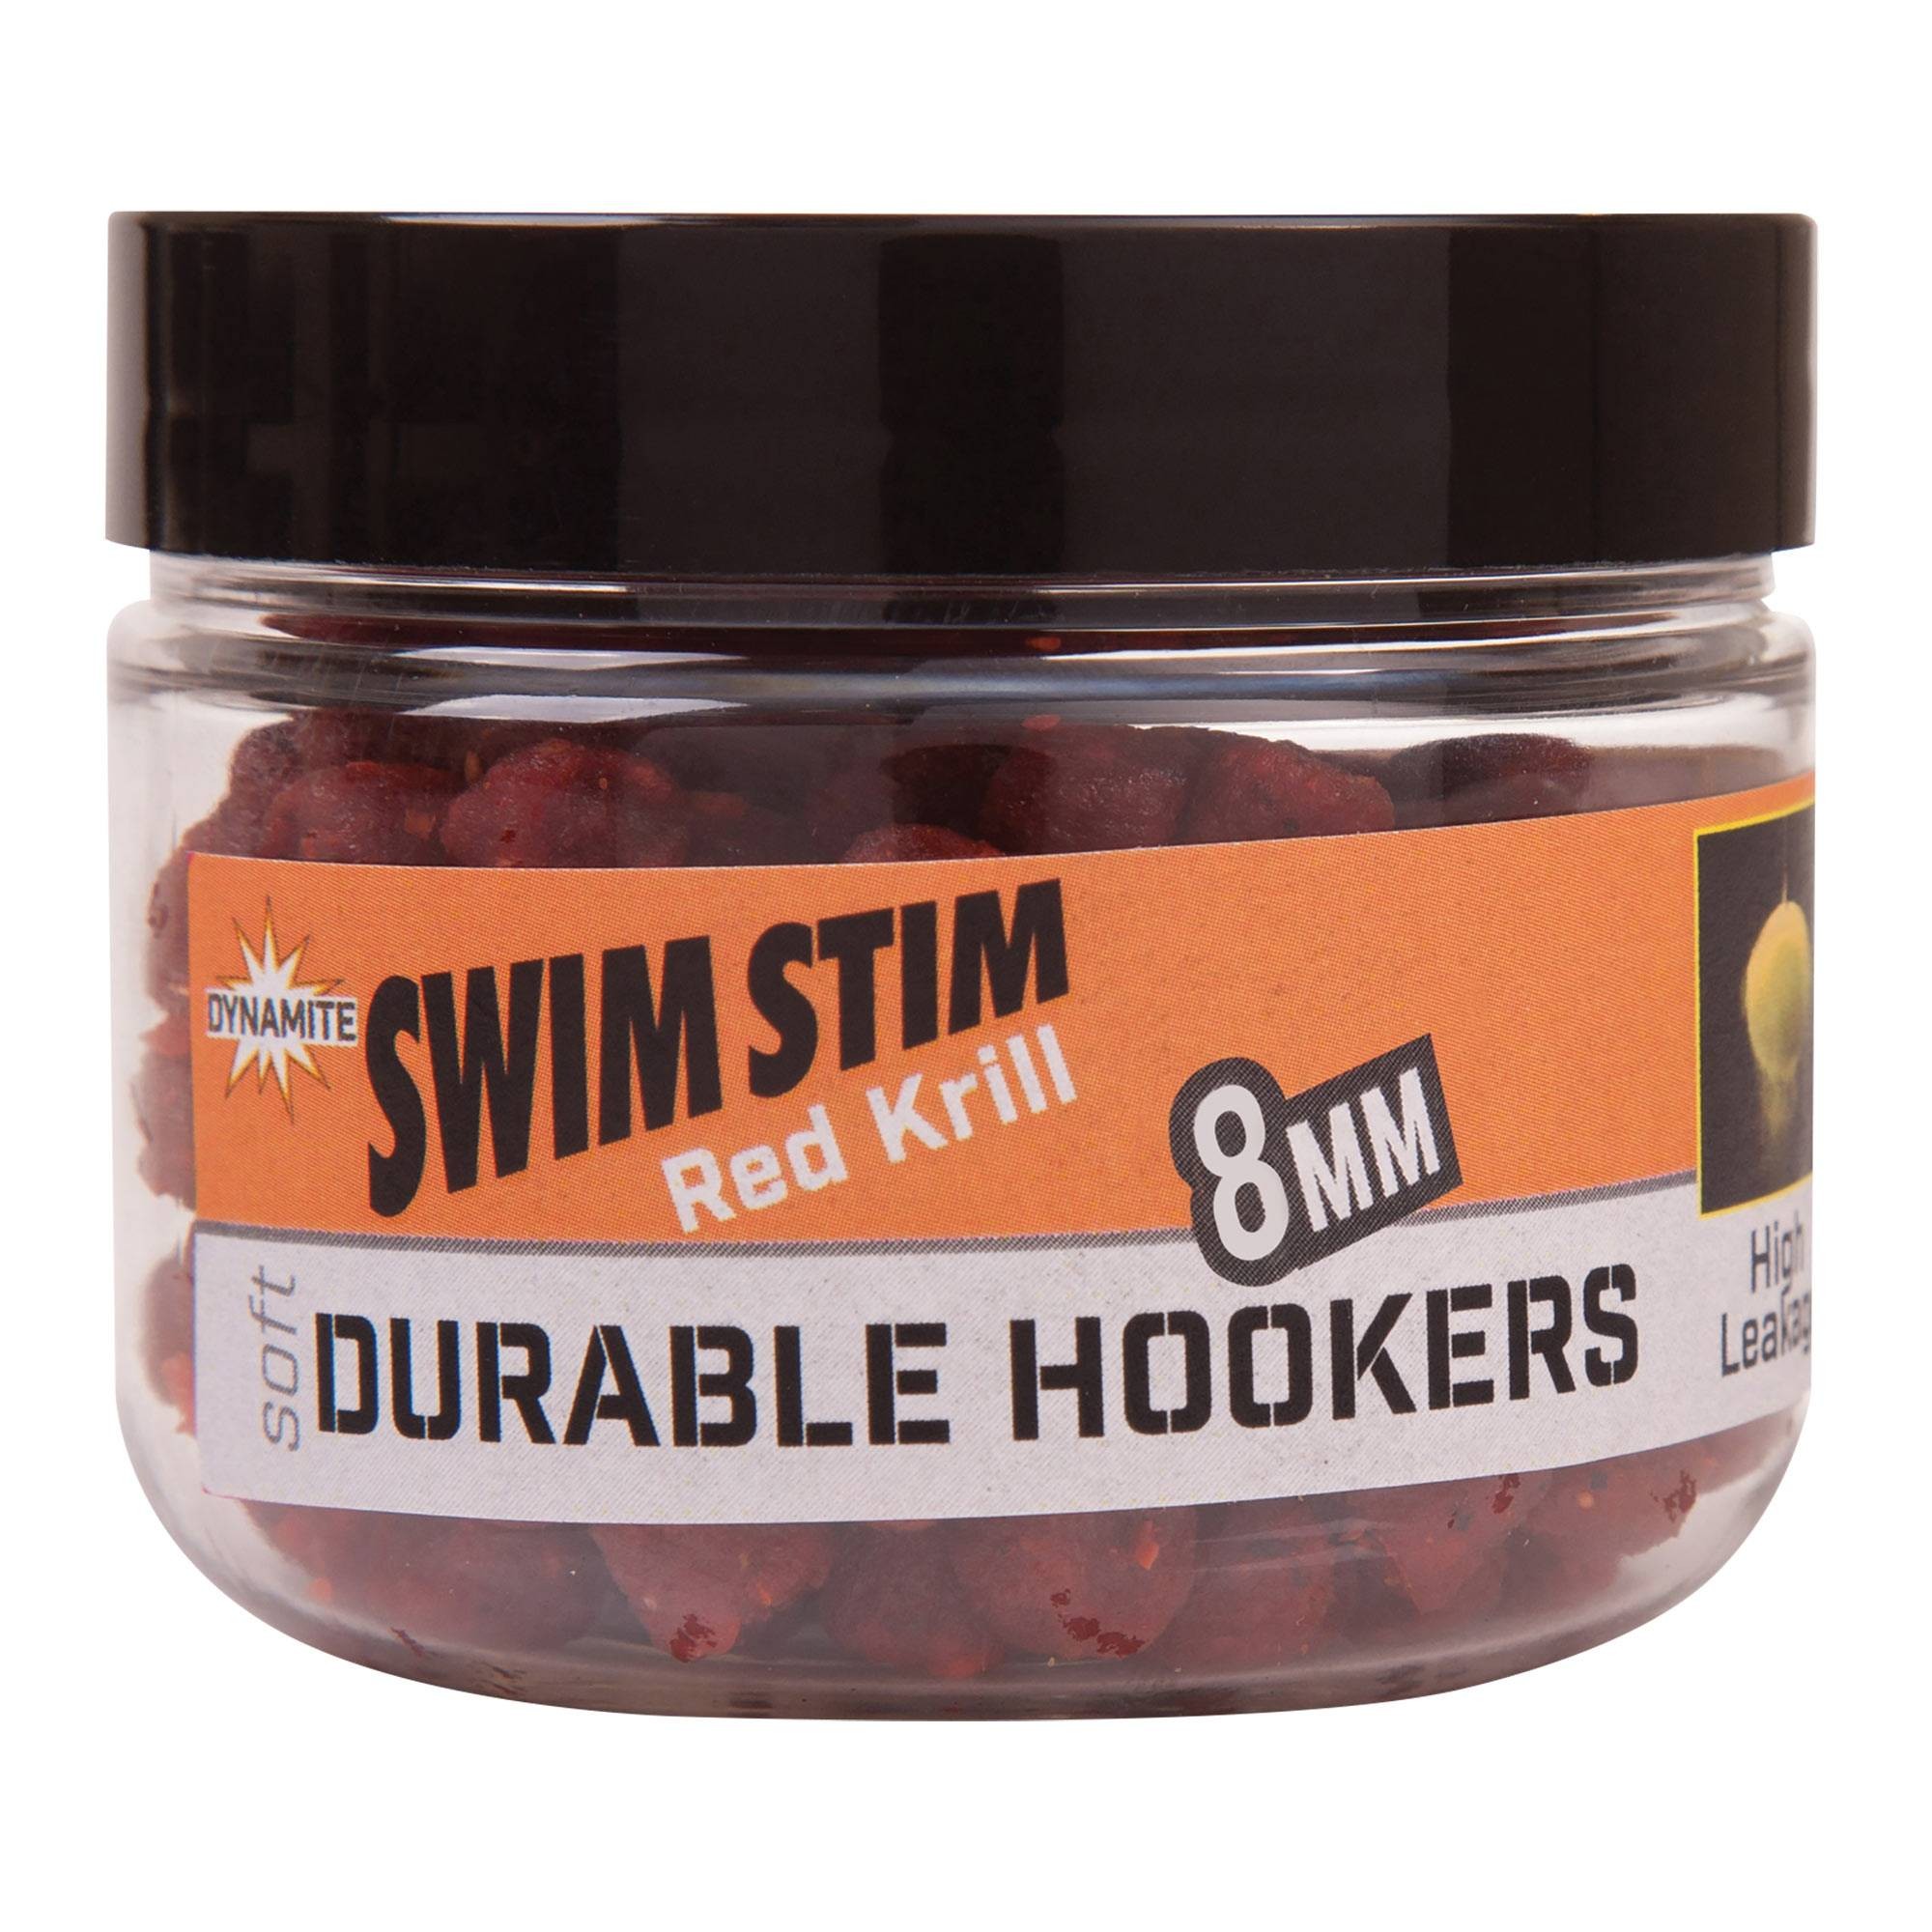 Dynamite Baits Durable Hookers Red Krill 8mm